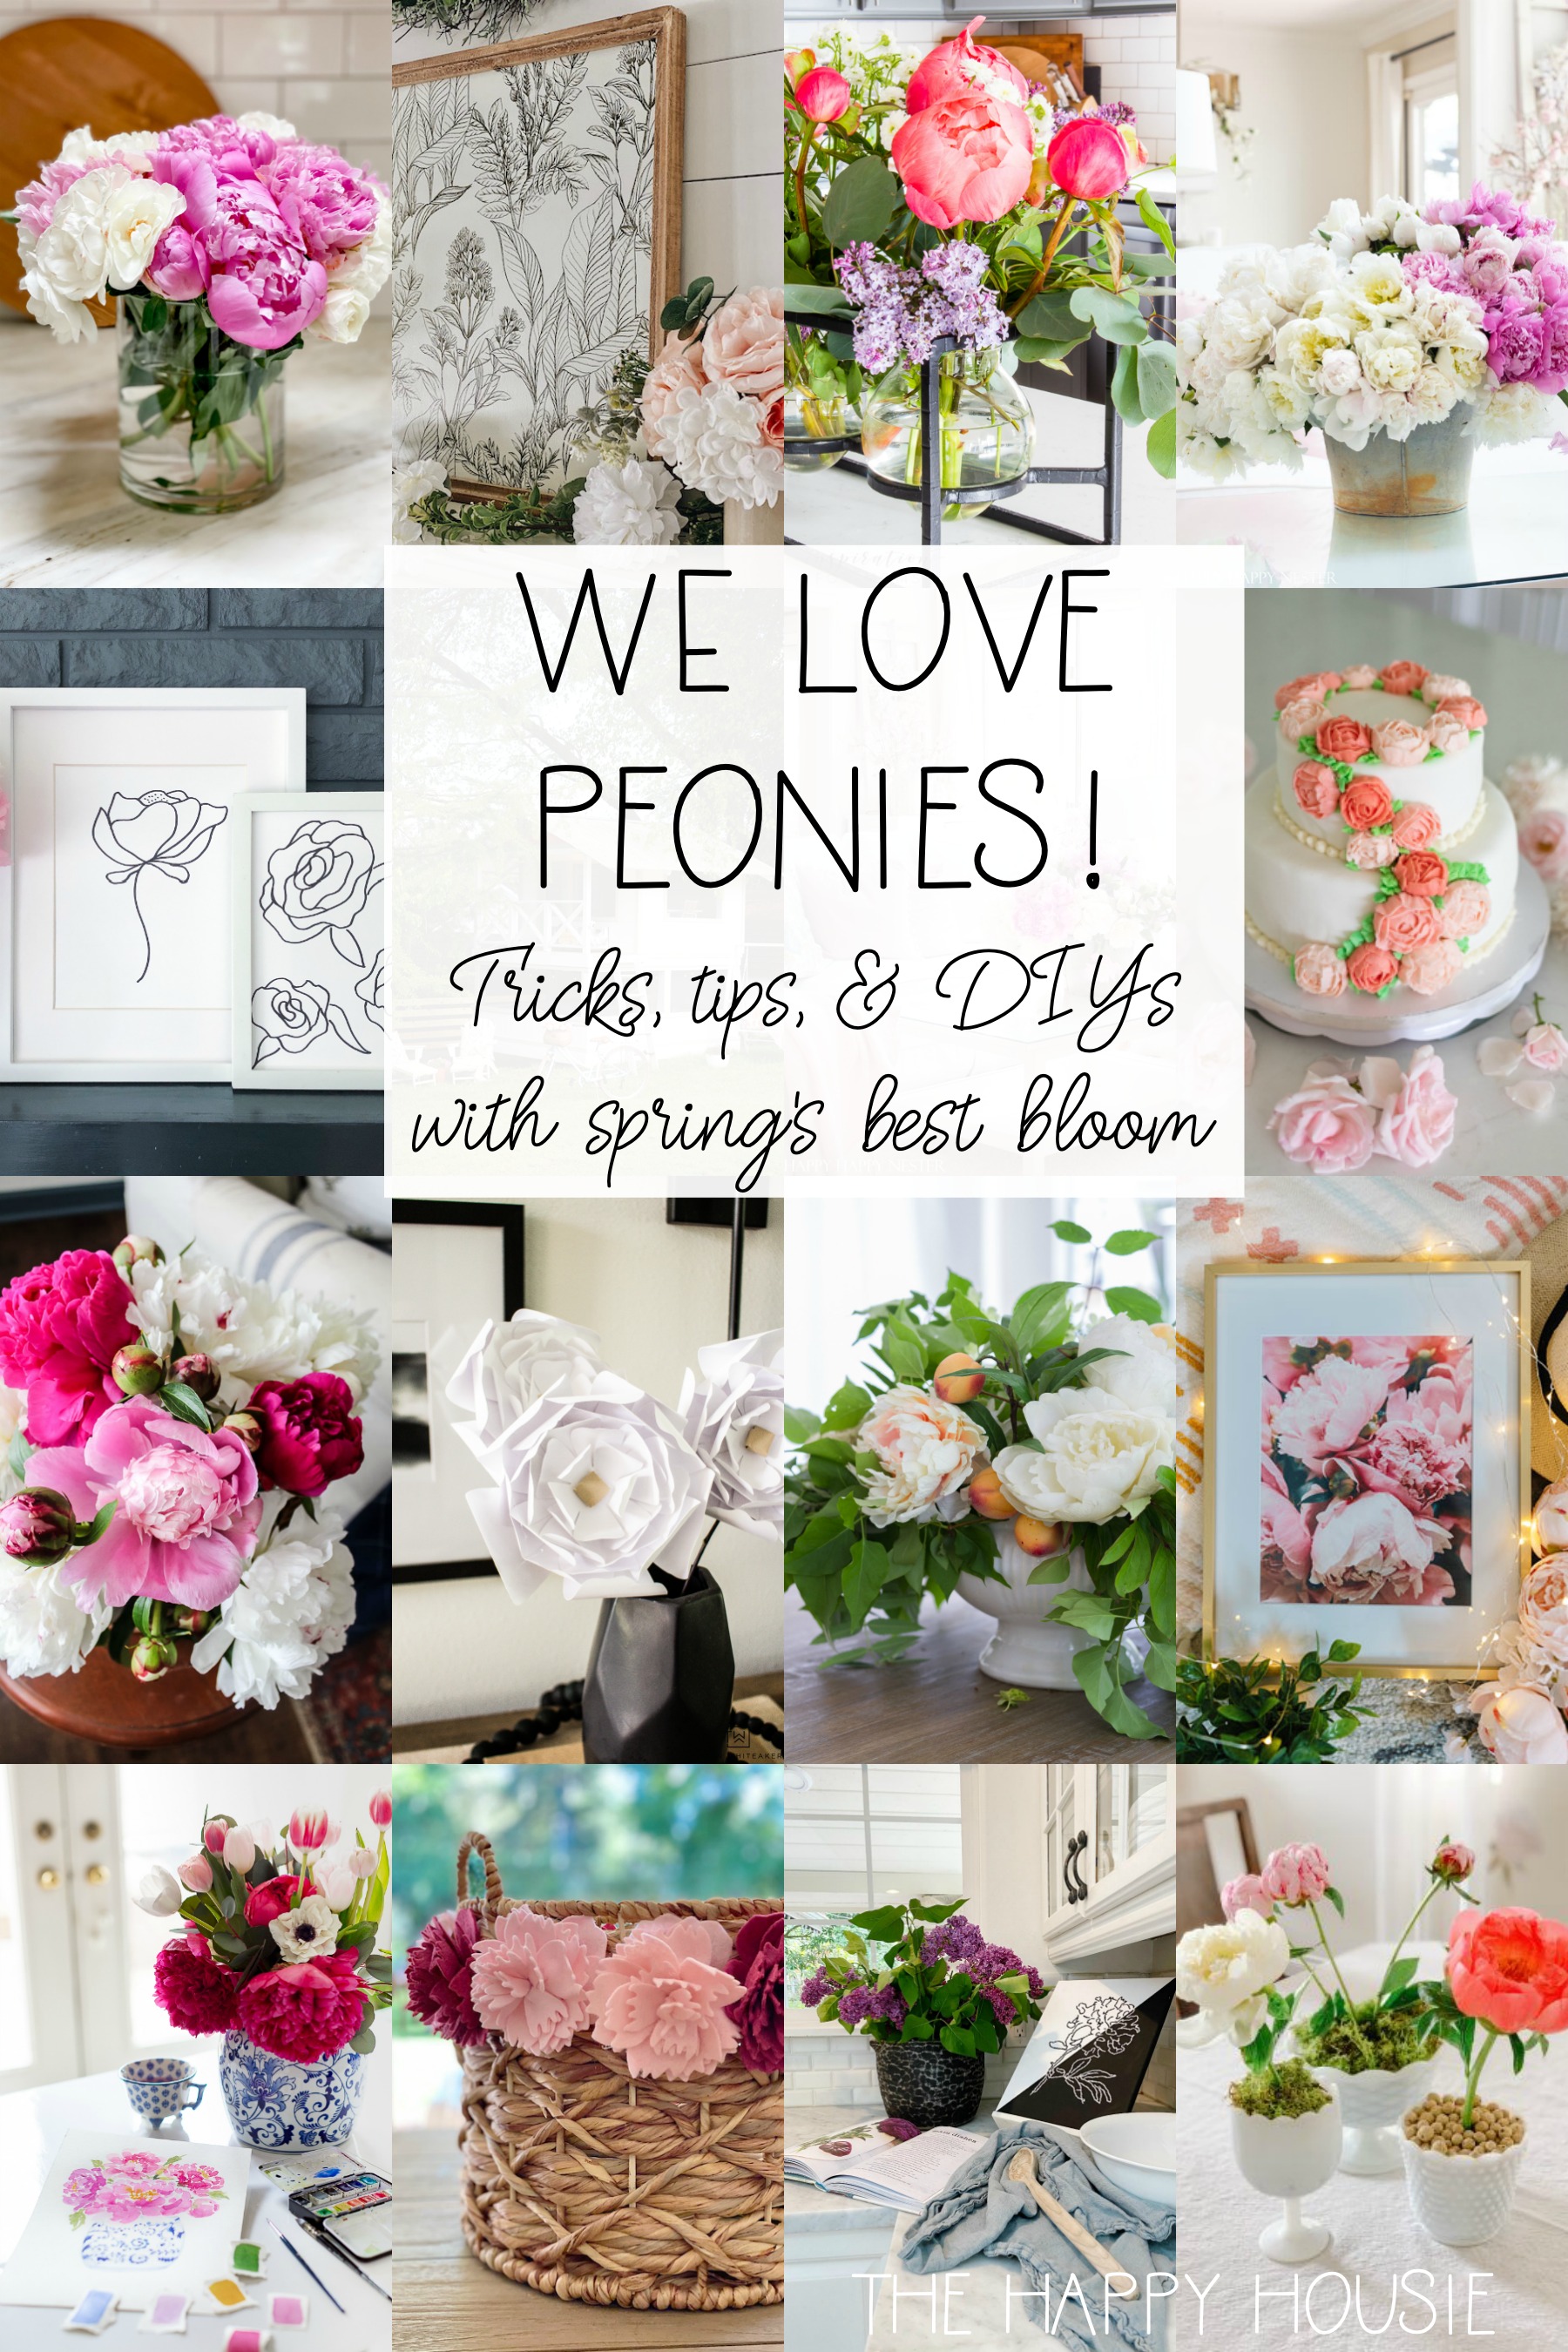 We love peonies graphic poster.